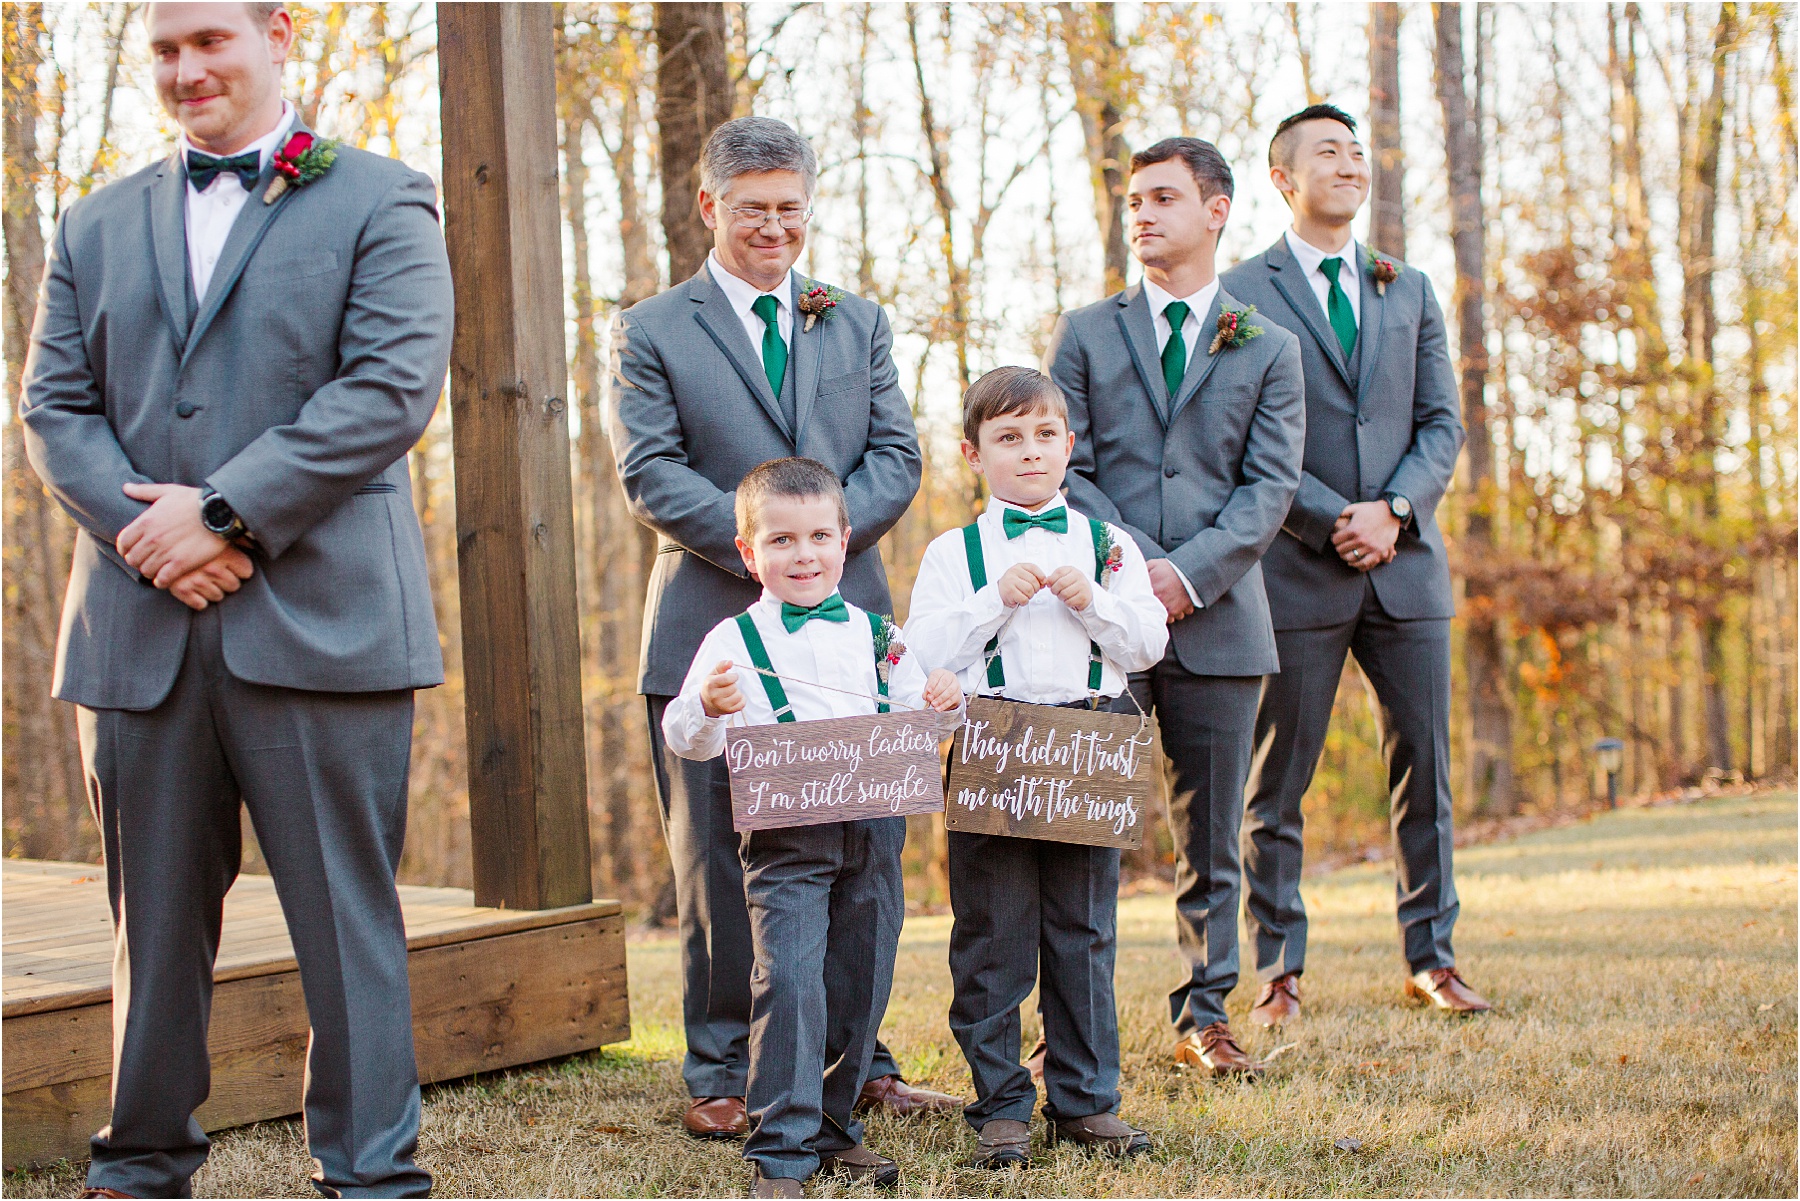 ring bearers hold wooden signs at front of ceremony